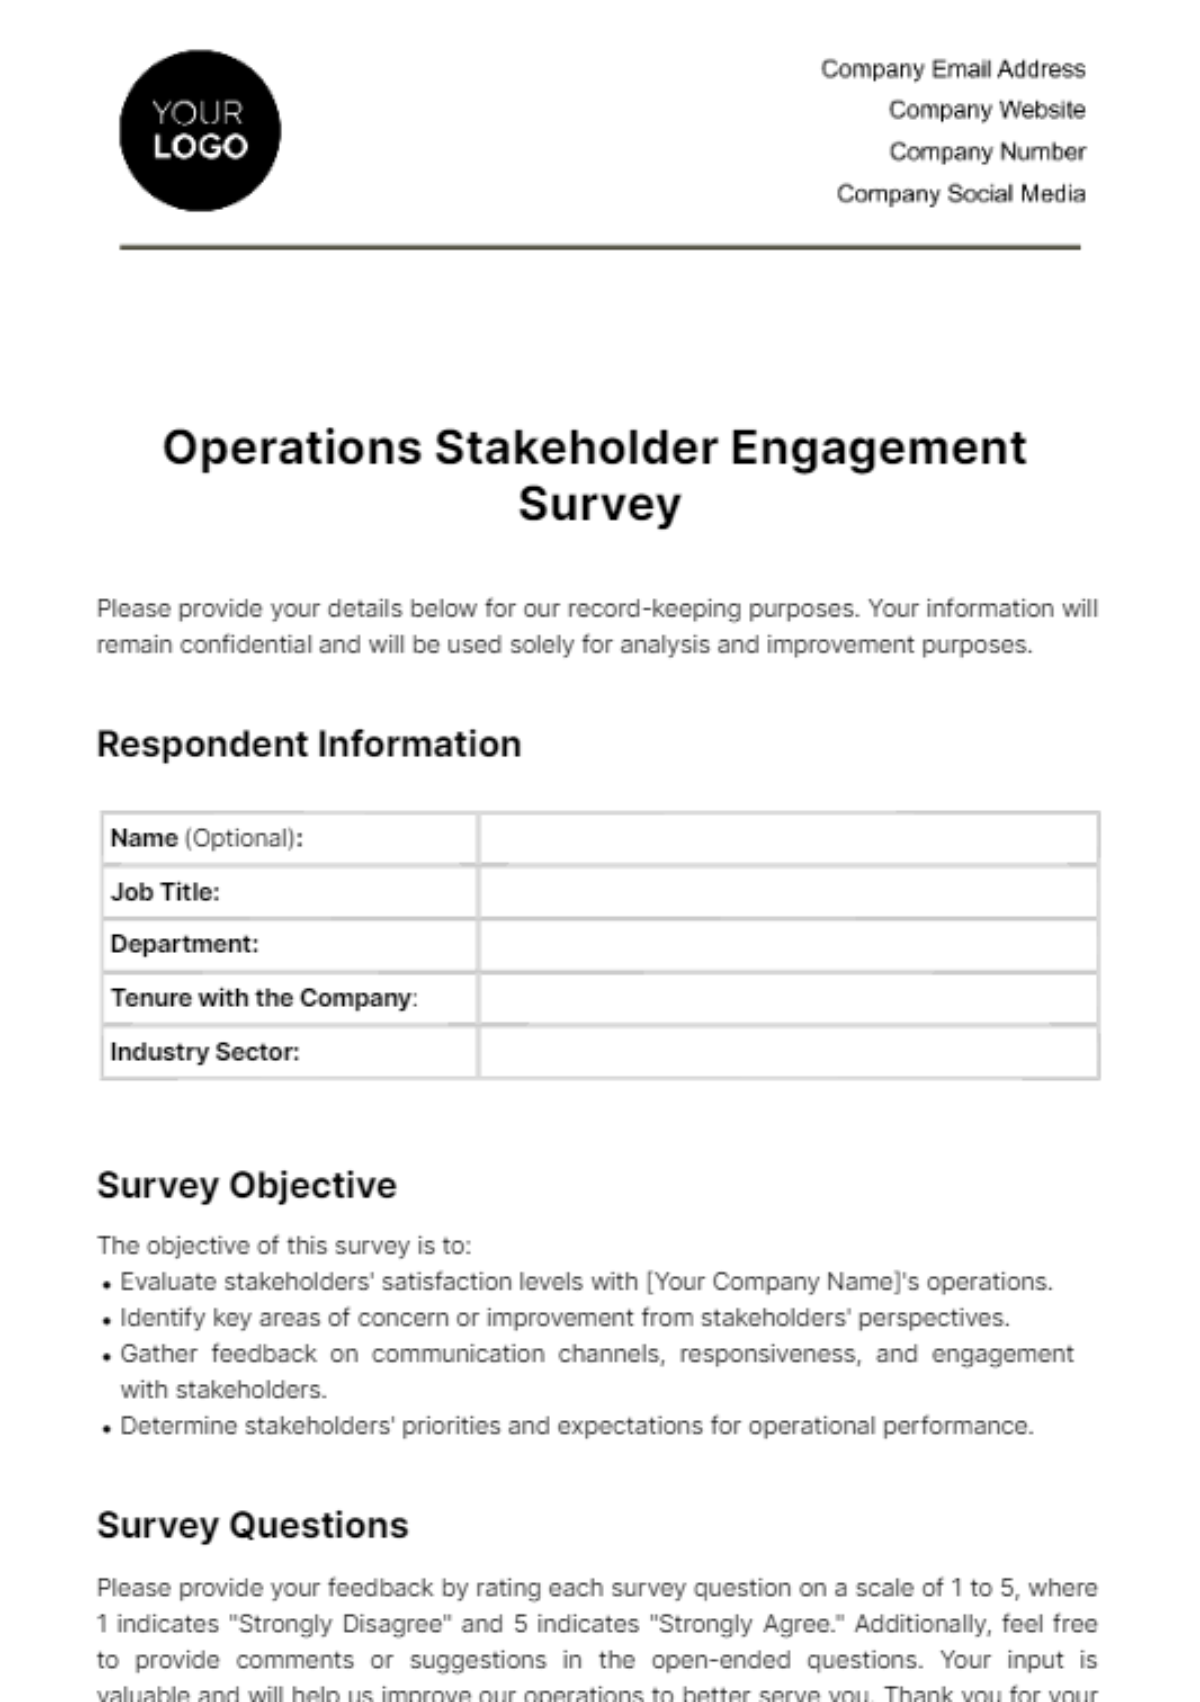 Operations Stakeholder Engagement Survey Template